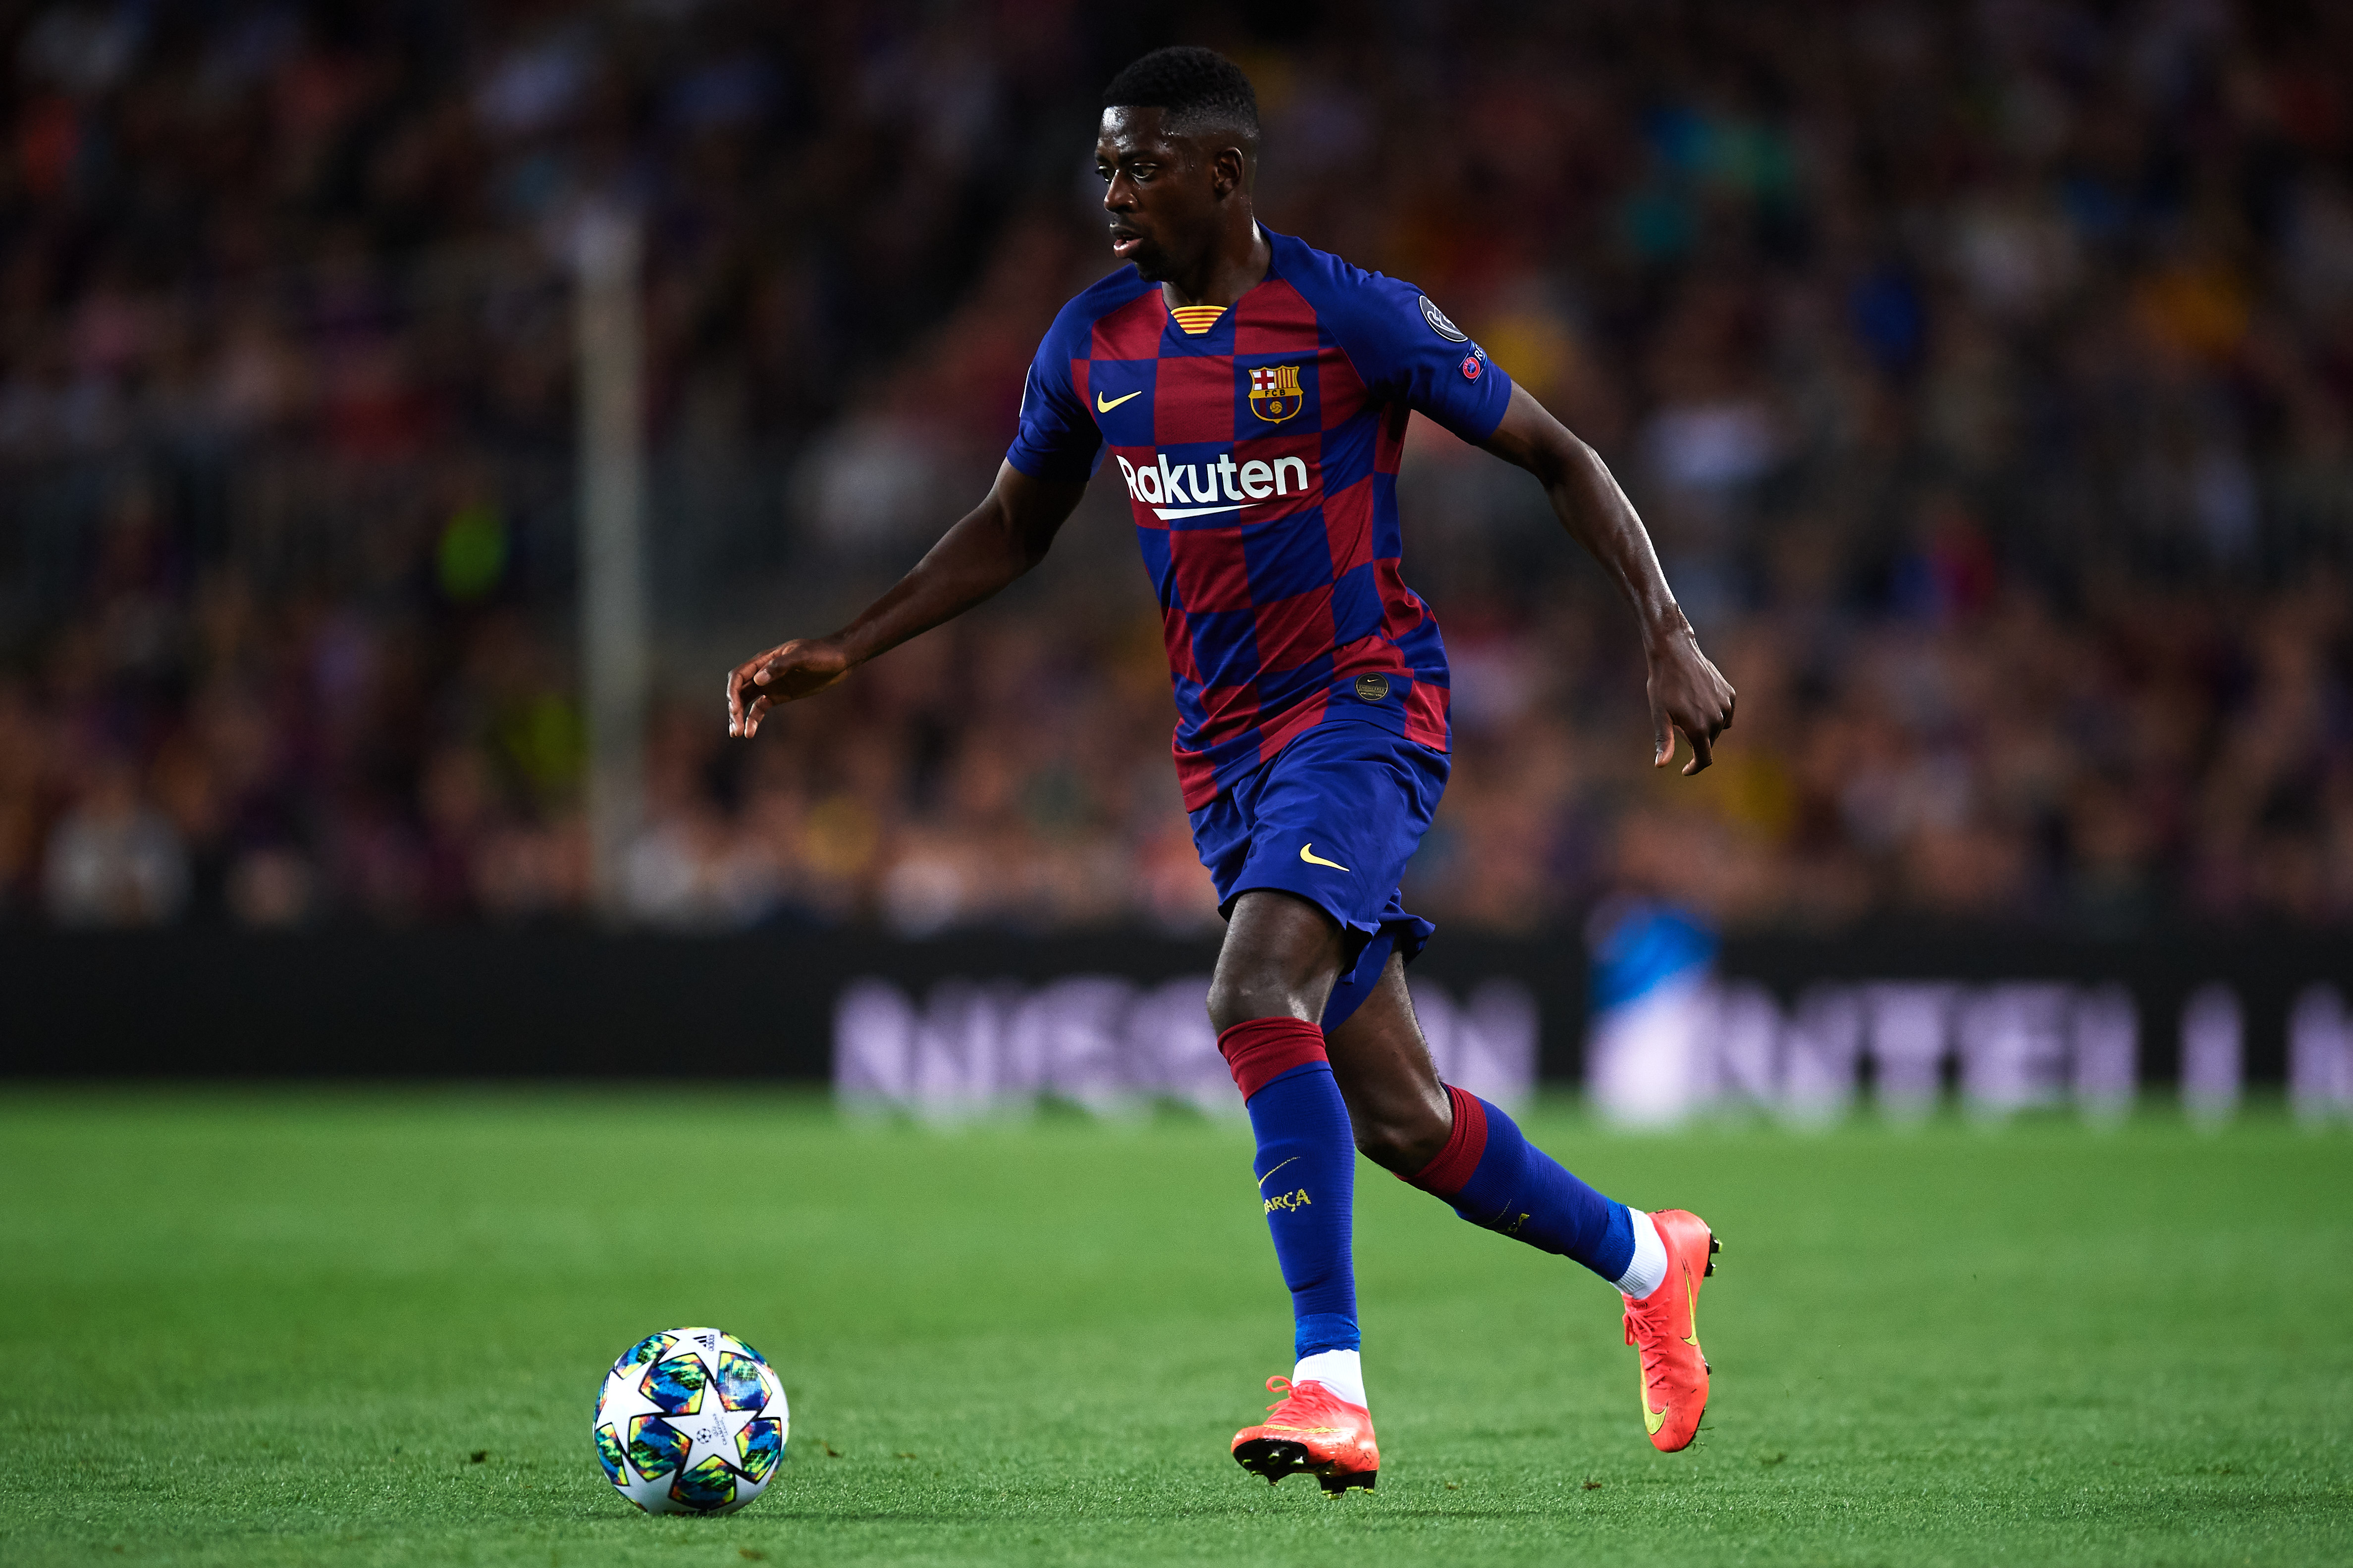 Dembele was once again impressive for Xavi's Barcelona but couldn't find the much-needed breakthrough (Photo by Alex Caparros/Getty Images)